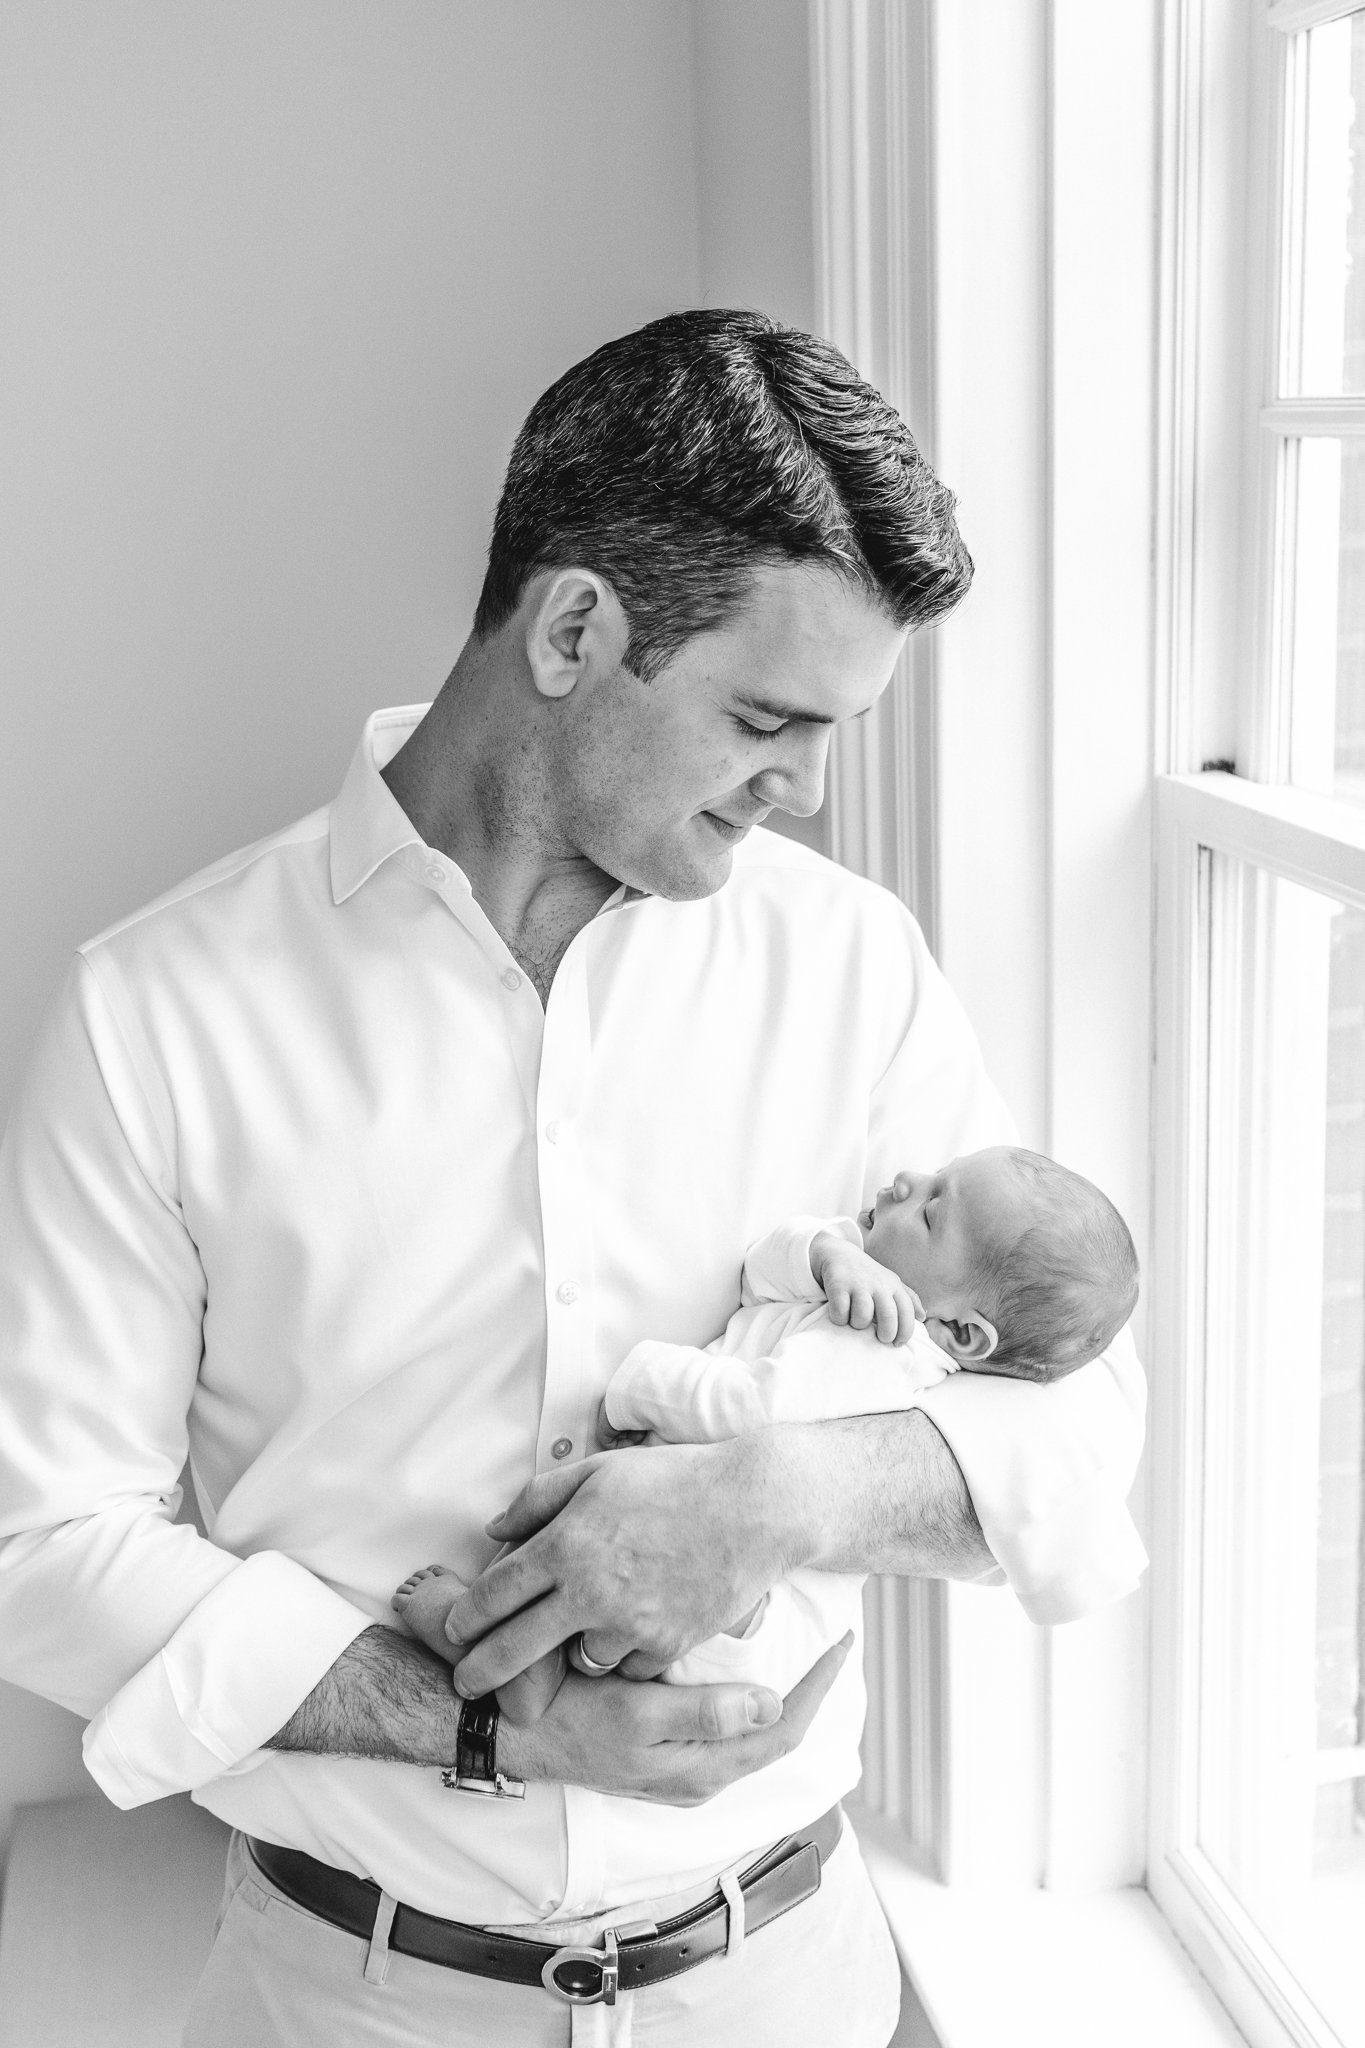  A father holds his baby girl in his arms next to a bright light window during an in-home newborn session in Chatham by Nicole Hawkins Photography. Chatham newborn photographers #NicoleHawkinsPhotography #NicoleHawkinsNewborns #Babygirl #Newbornfamil